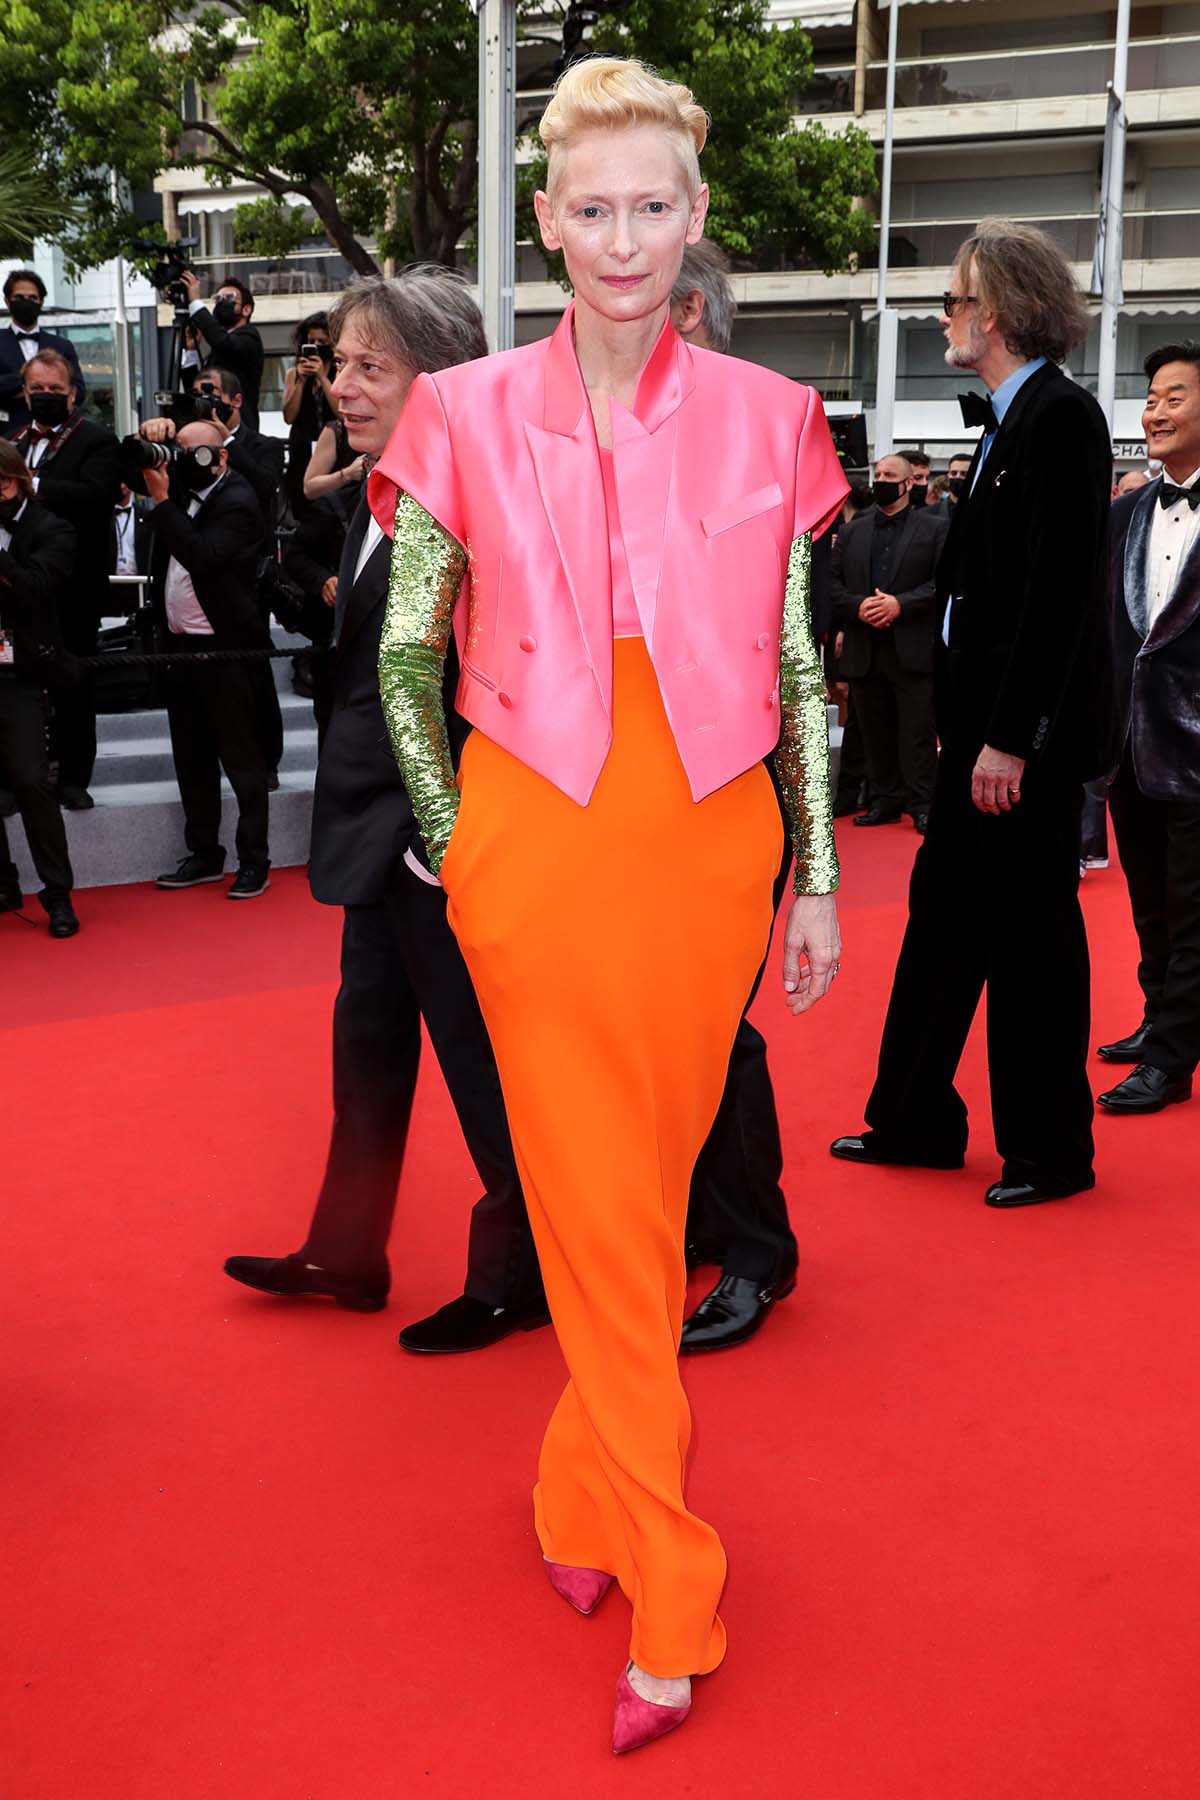 Cannes Film Festival 2021 See Best Red Carpet Fashion